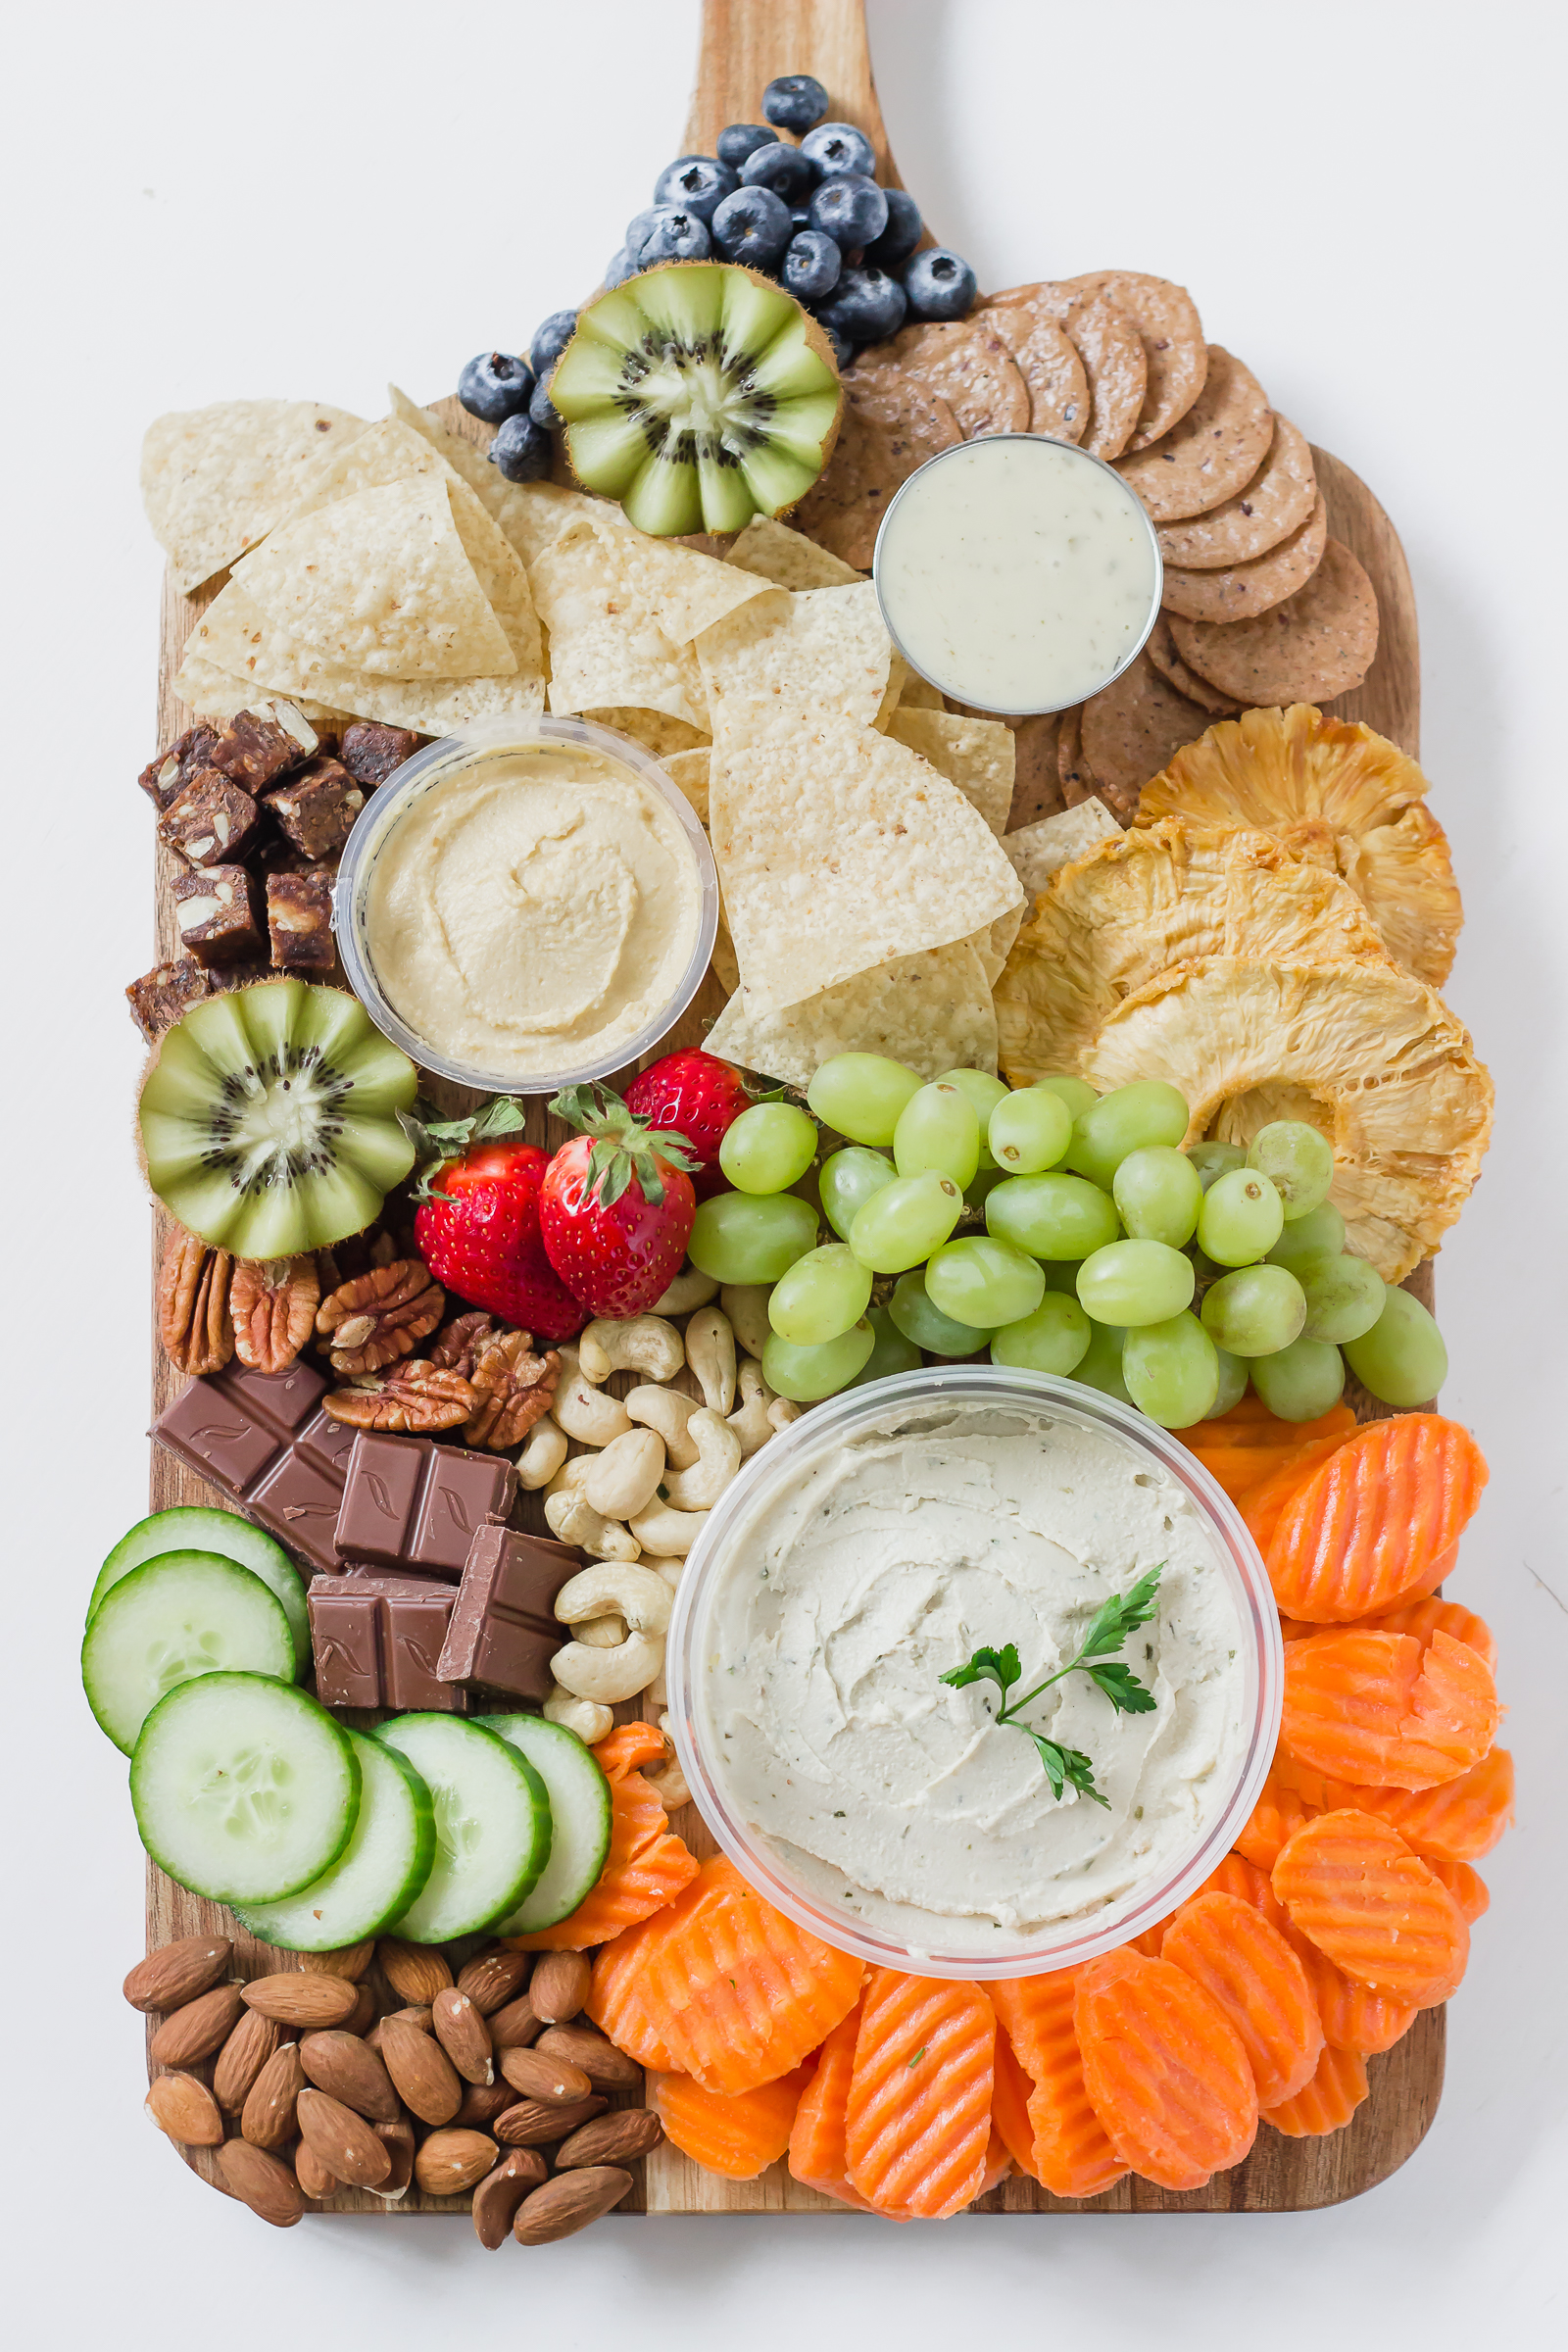 Healthy Party Platter & Refreshing Rose Recipe - Exploring Healthy Foods